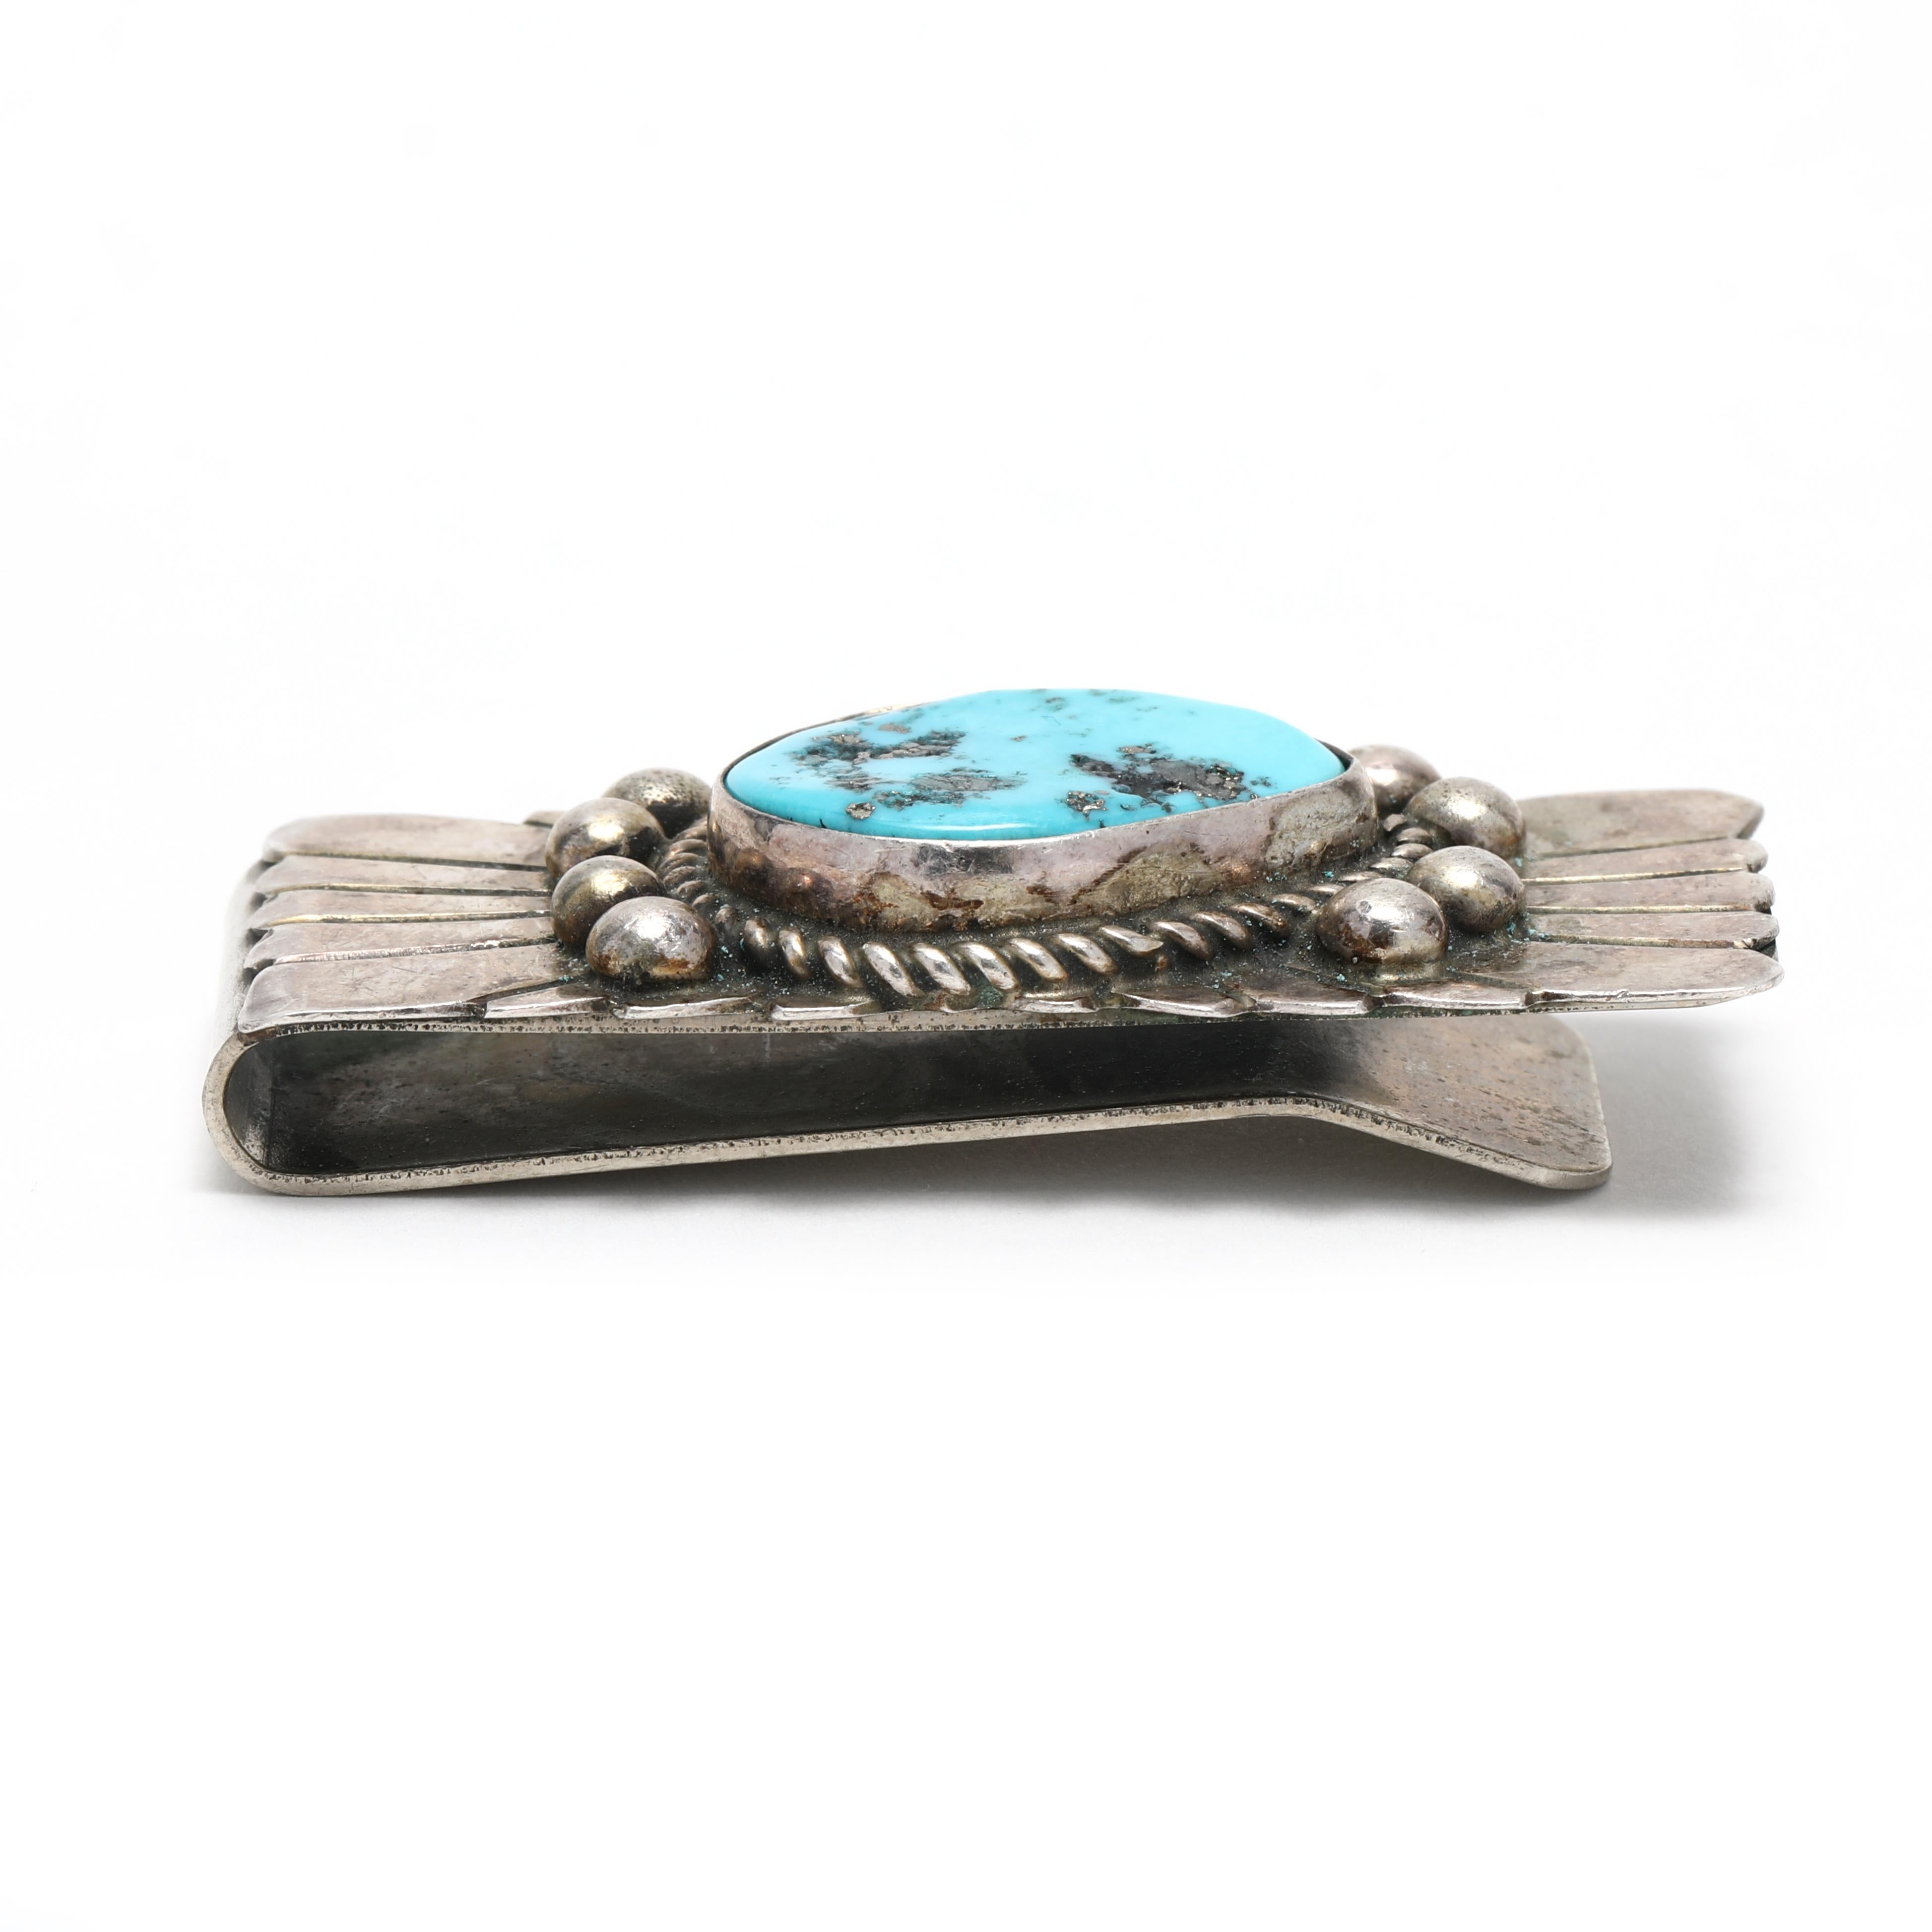 This stunning Southwestern-style money clip is the perfect way to keep your money secure in style! Handcrafted from sterling silver, this stunning vintage money clip features a beautiful turquoise stone in the center. The length of this money clip